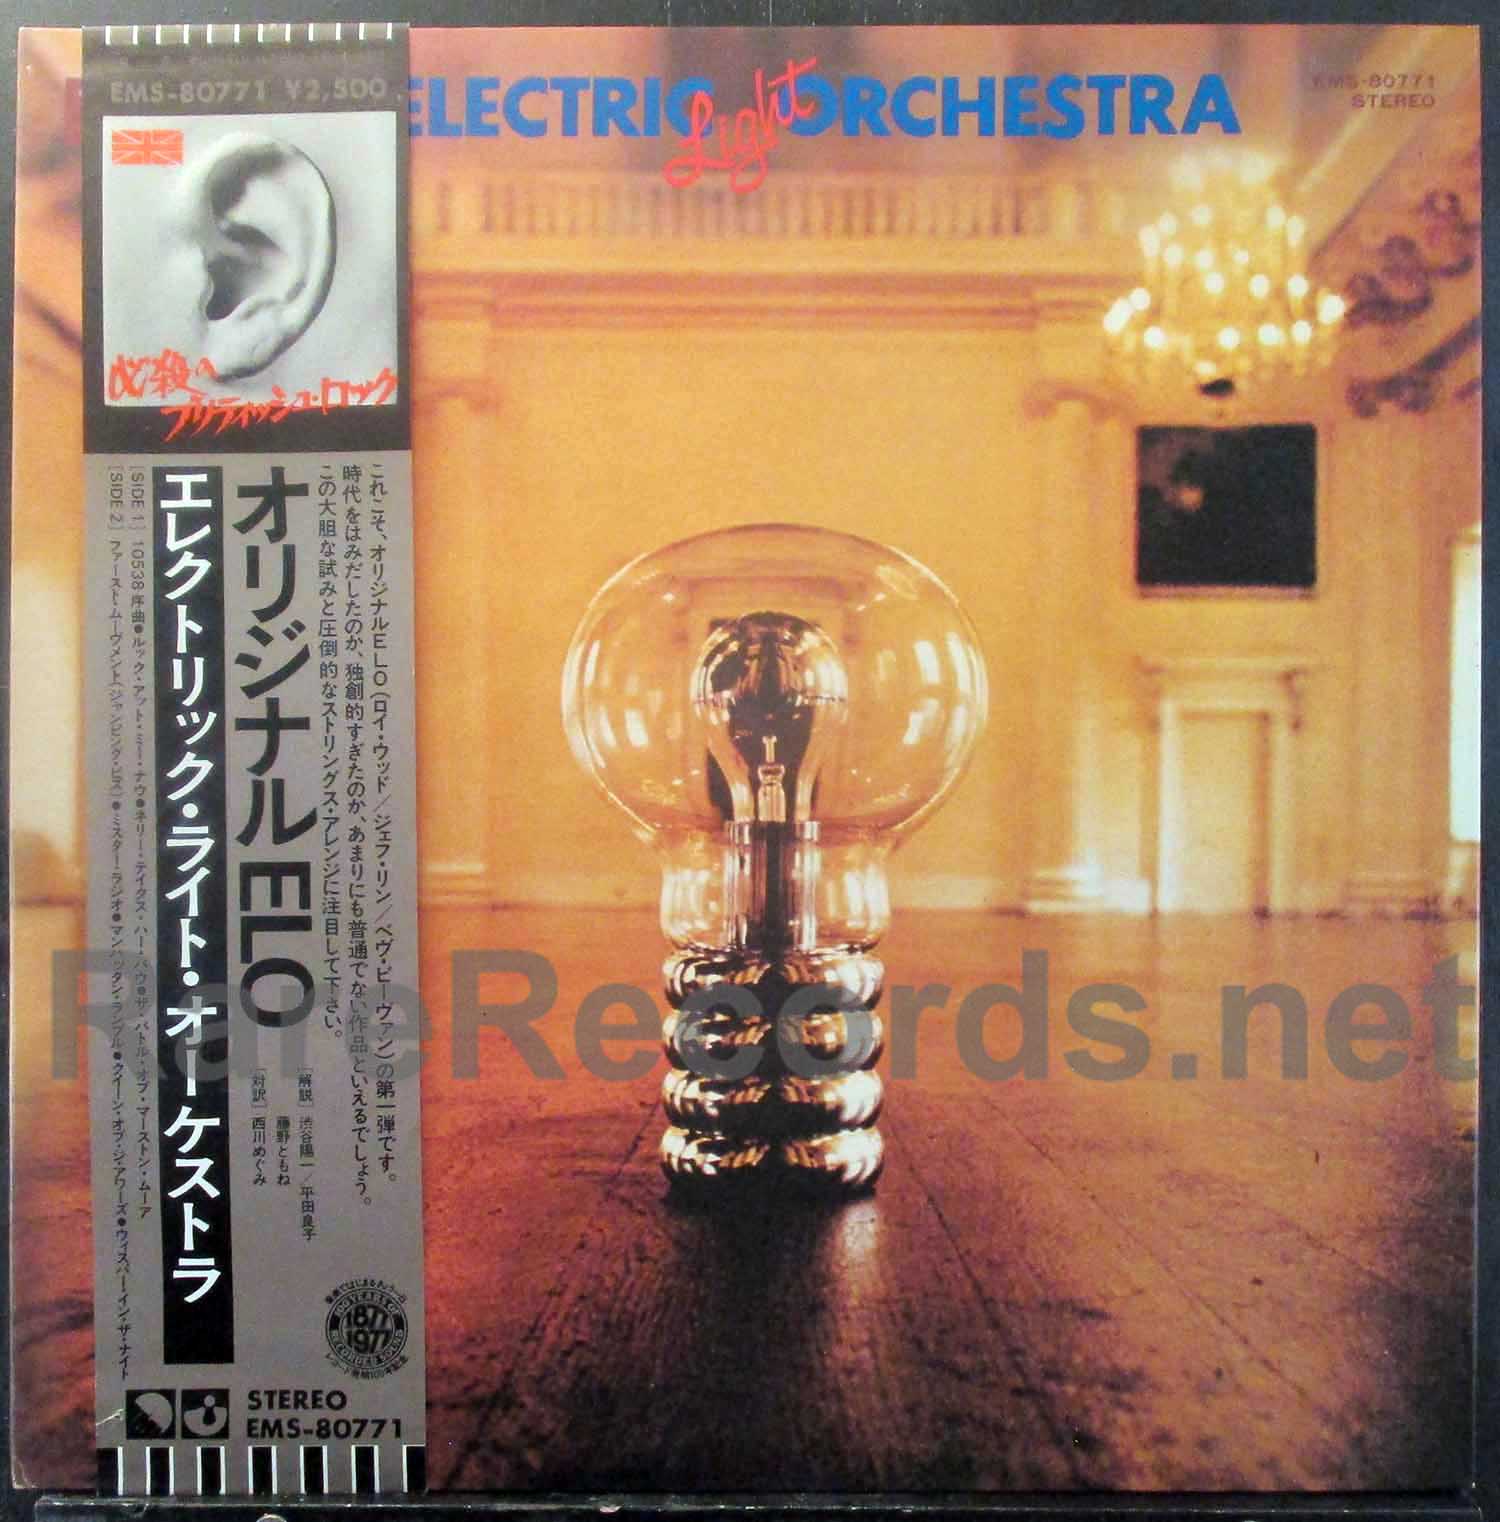 Electric Light Orchestra (ELO) – Face the Music 1976 Japan LP with obi